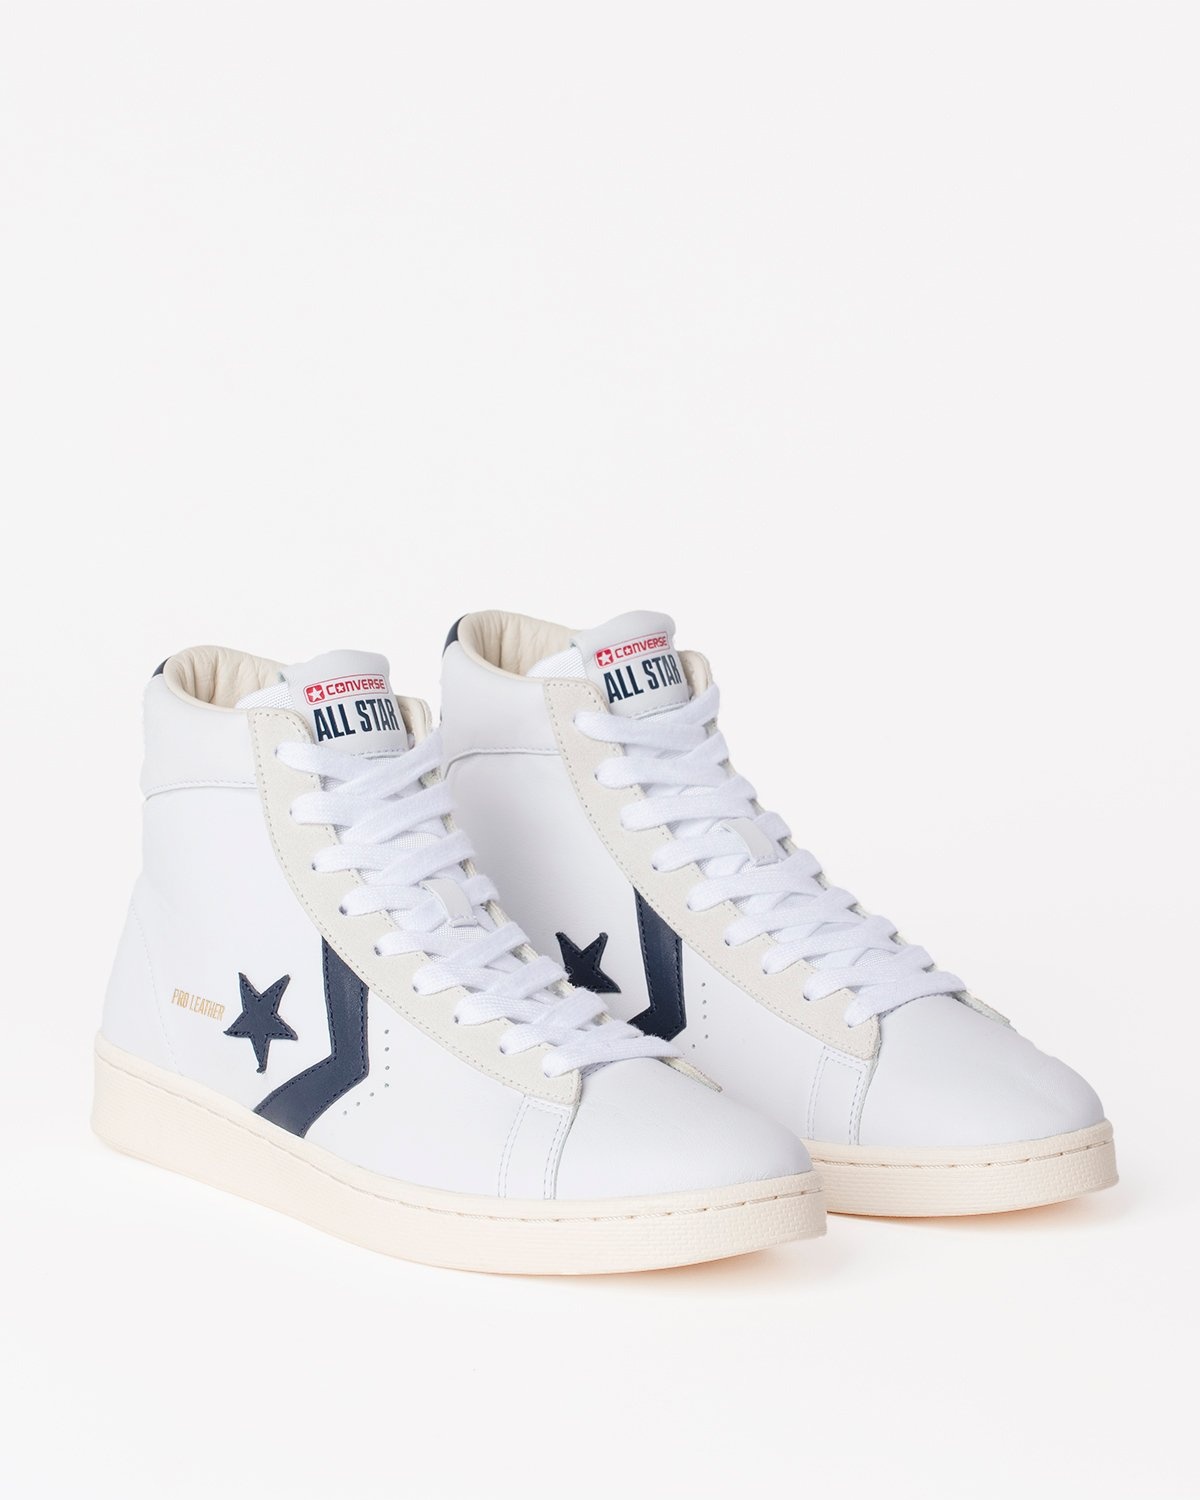 Converse – Pro Leather OG Mid White/Obsidian/Egret - Sneakers - White - Image 5